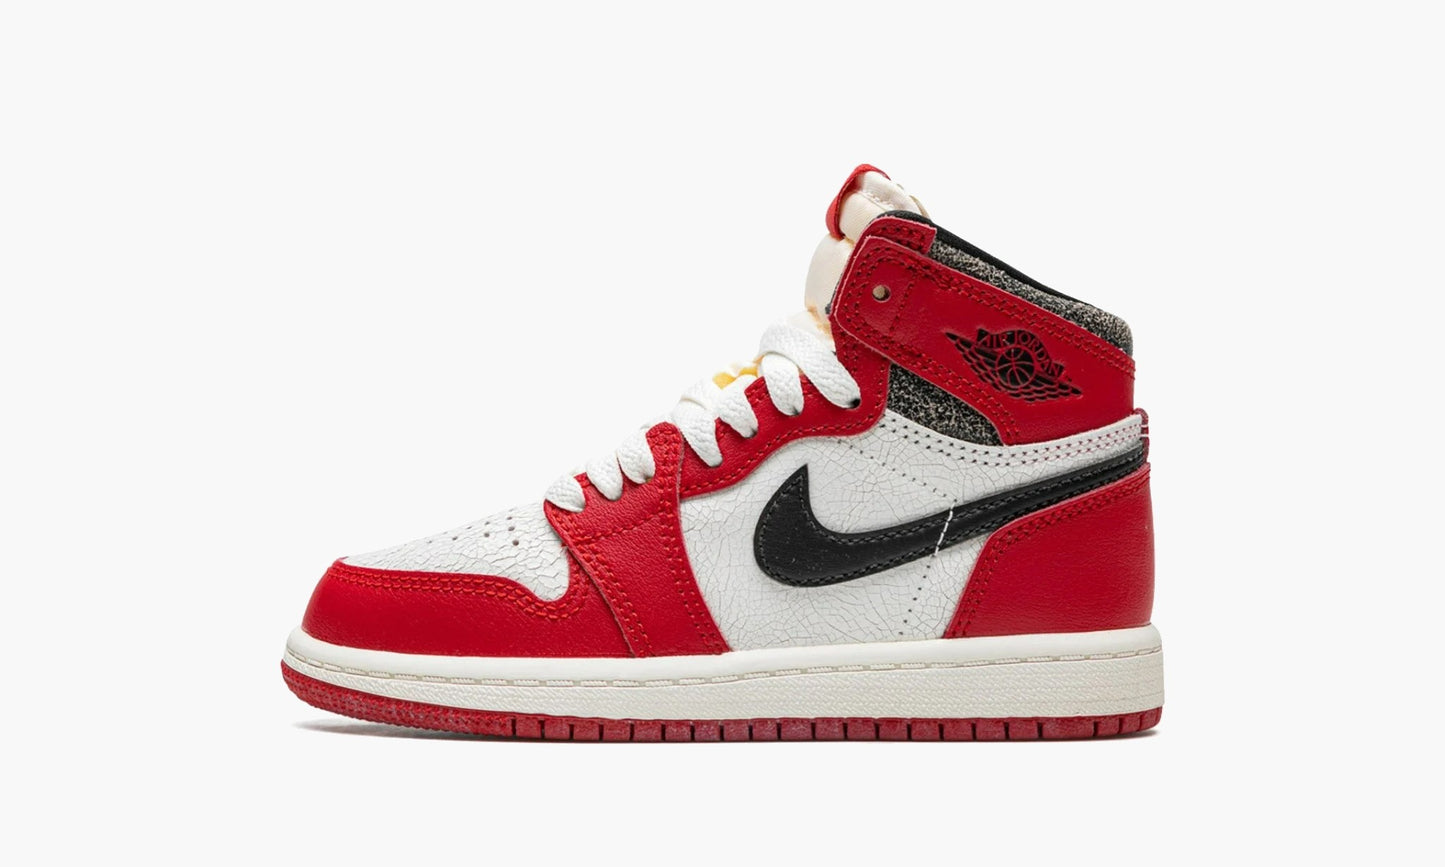 Air Jordan 1 Retro High OG PS Chicago Lost and Found - FD1412 612